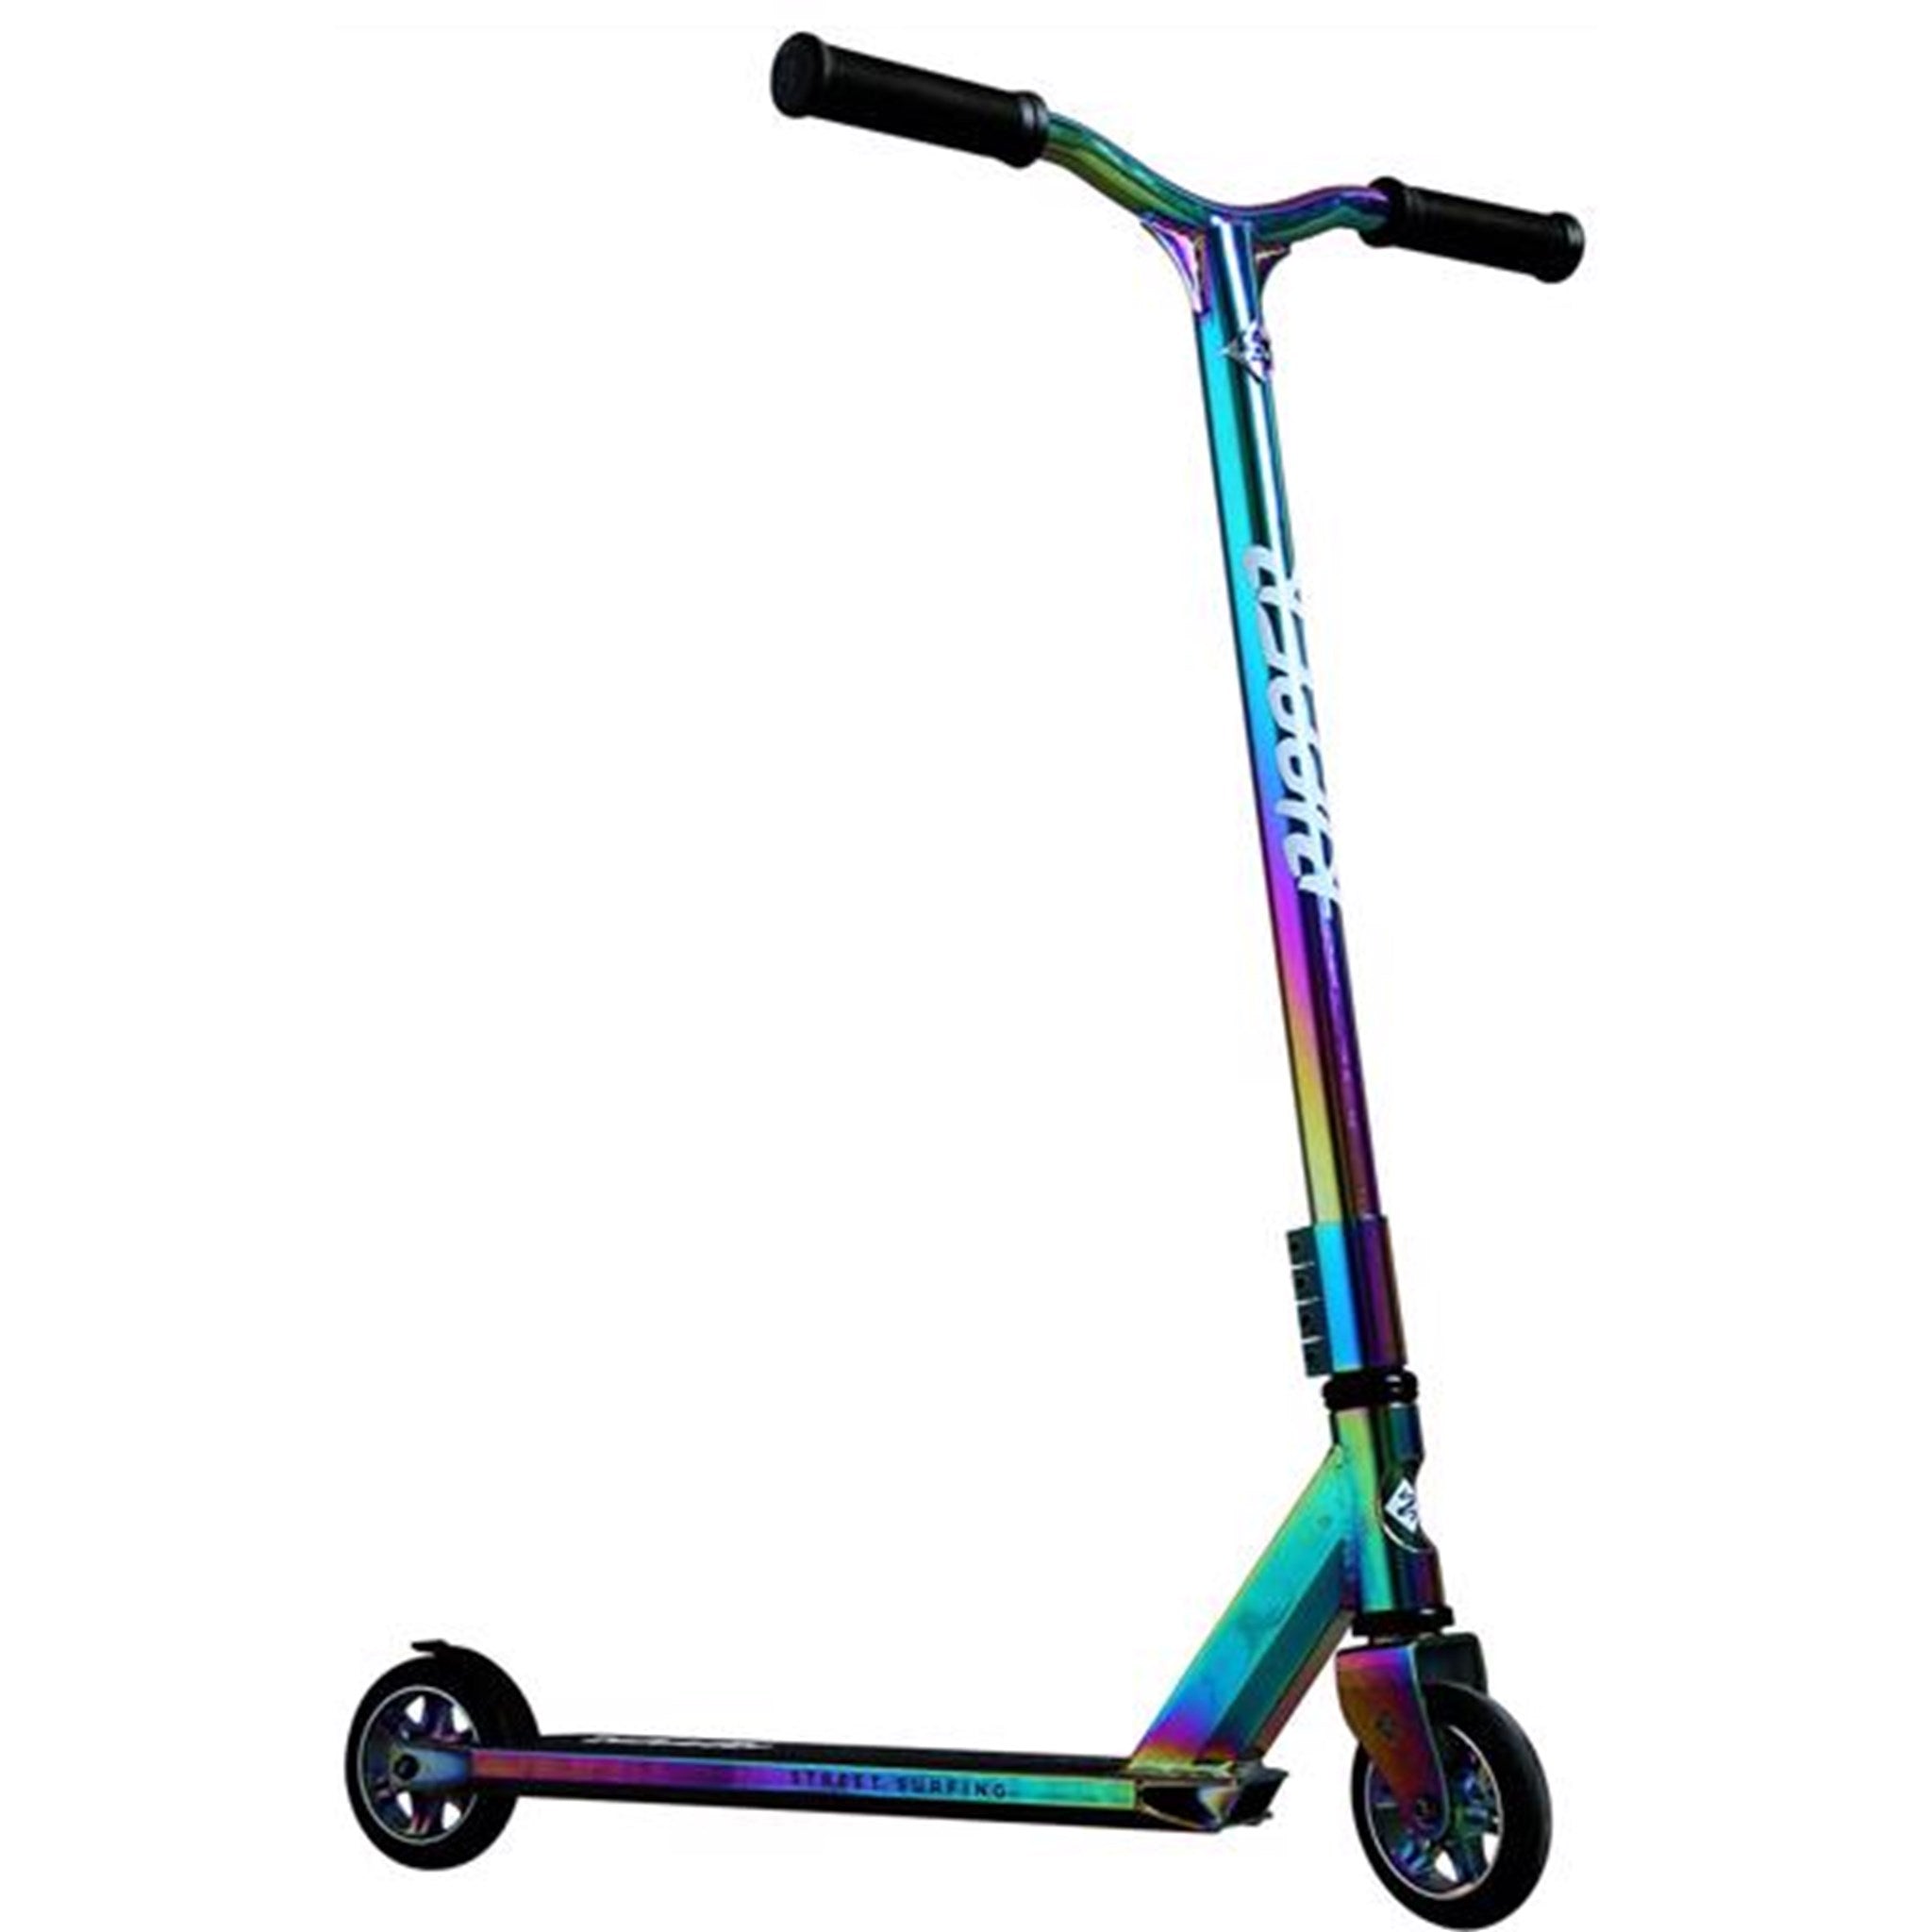 Street Surfing Scooter Ripper Neochrome 3